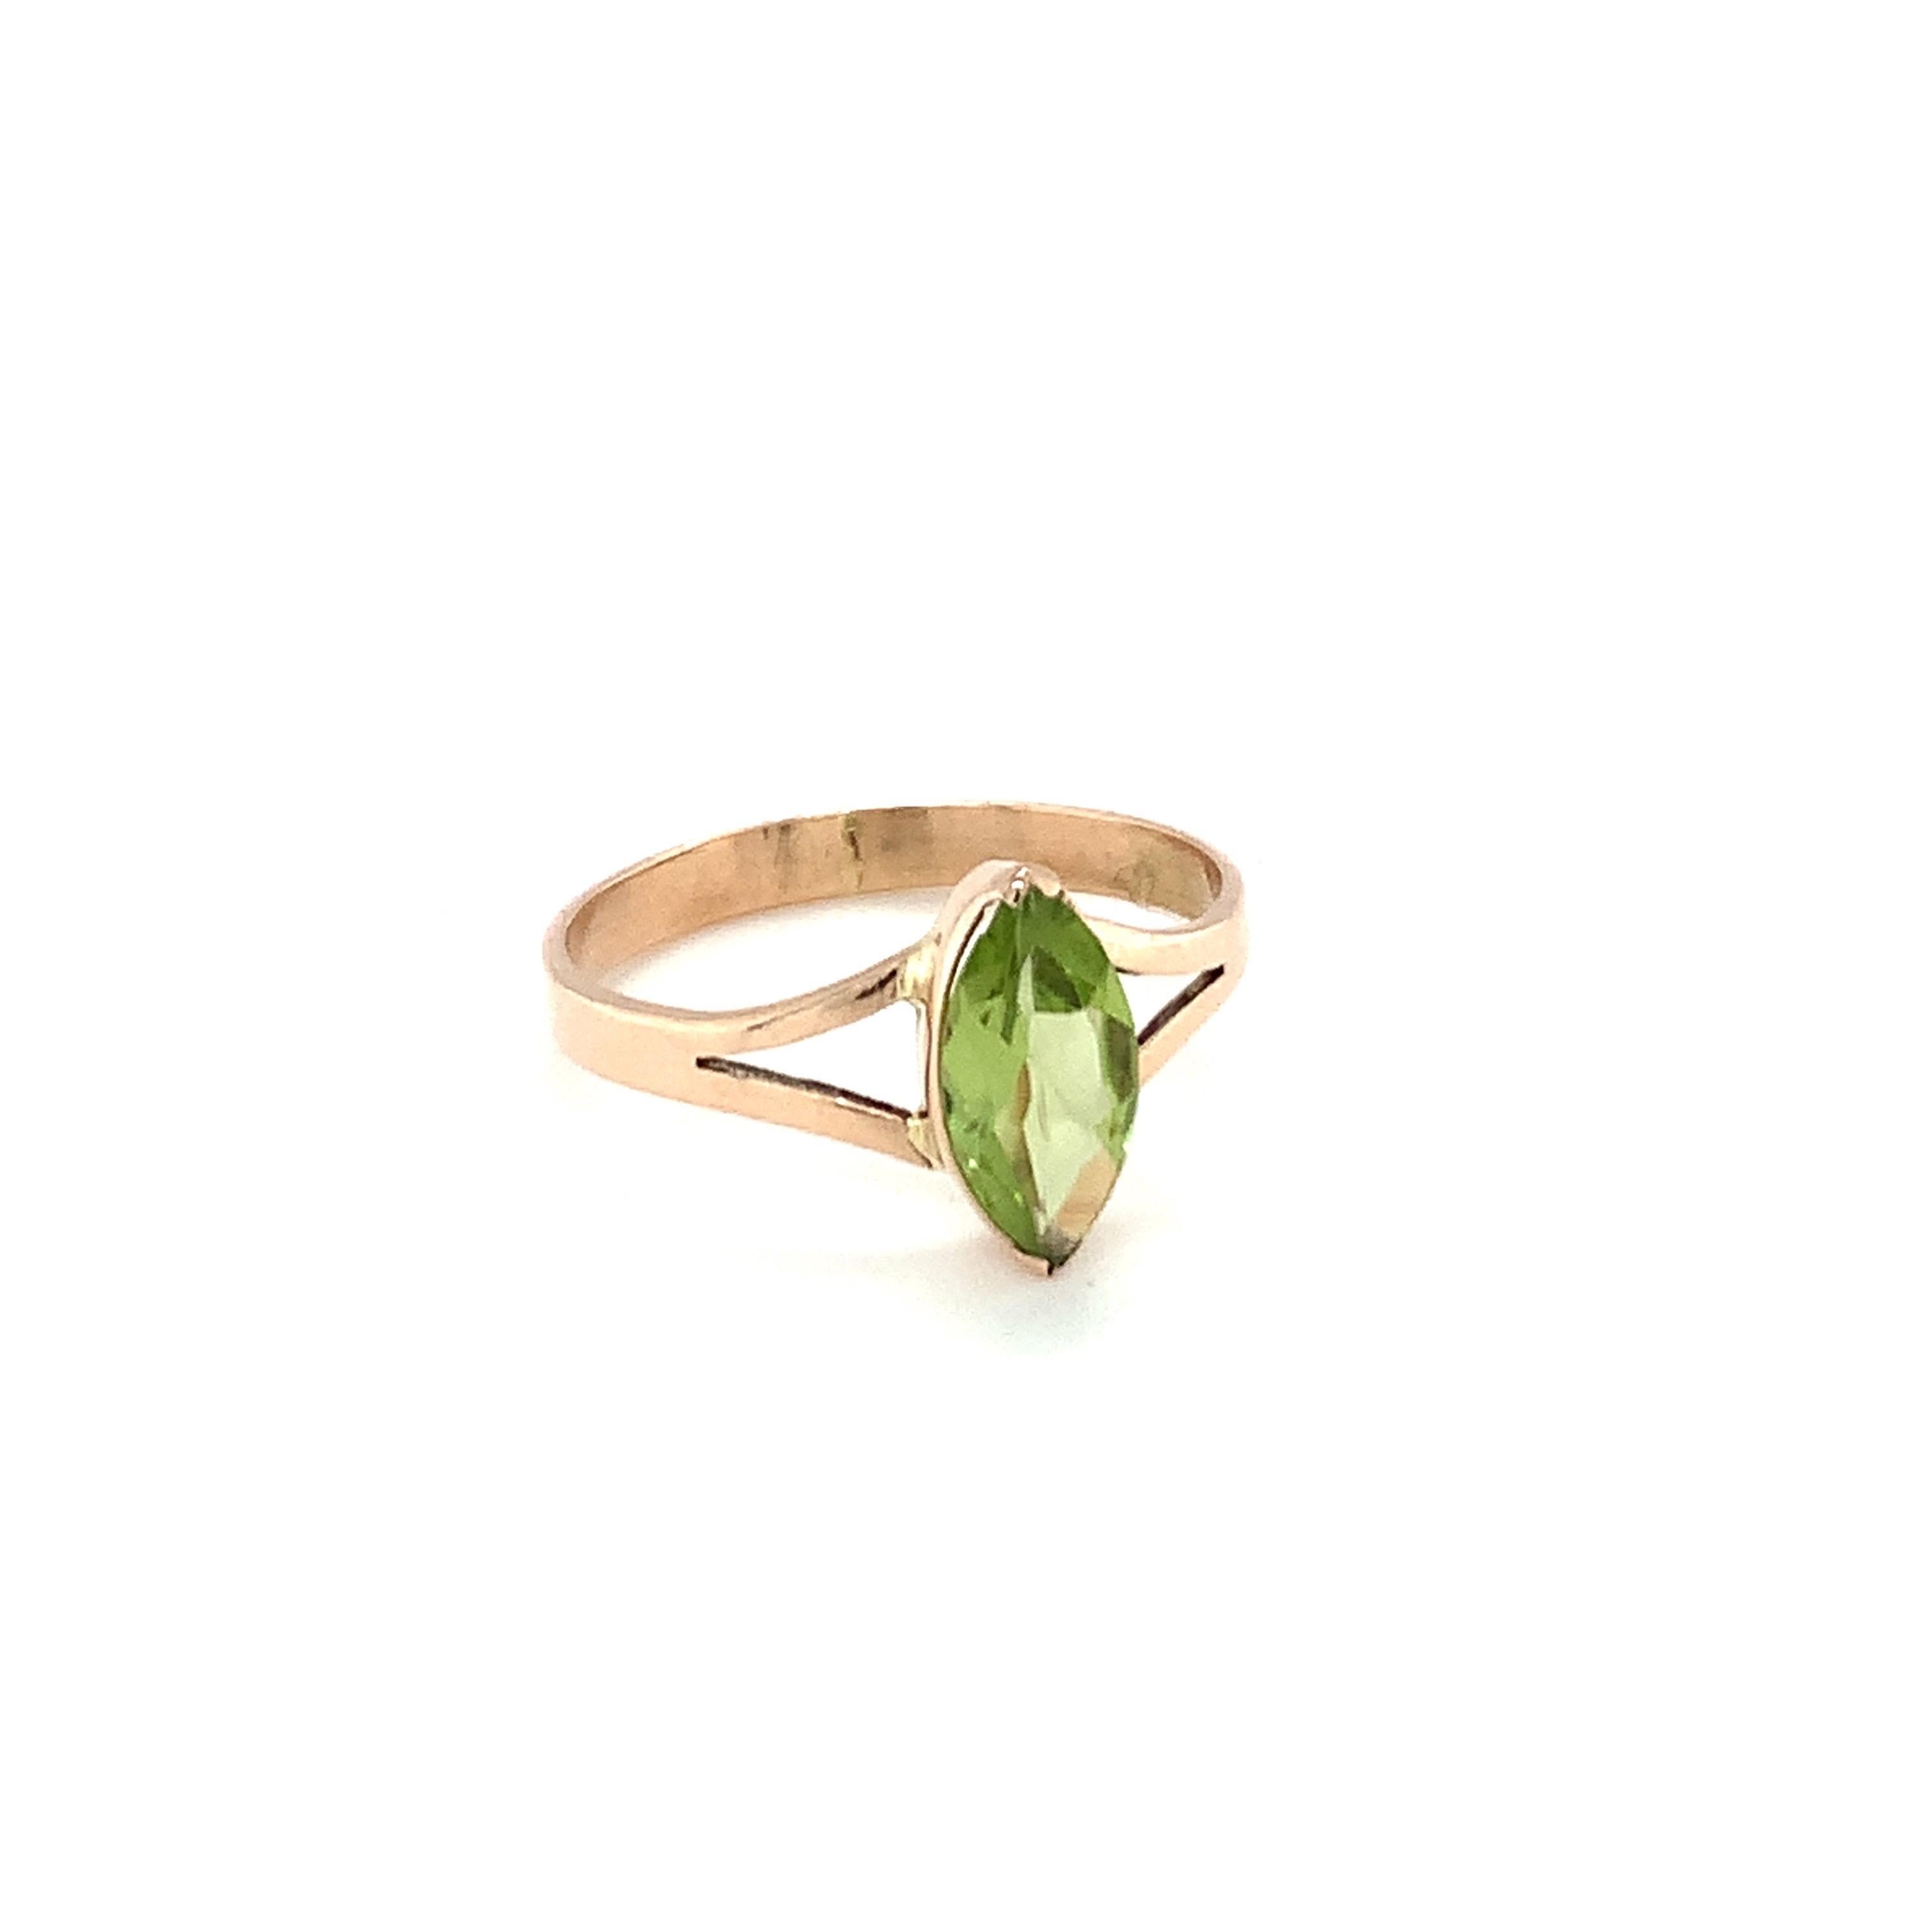 Hand cut and polished natural peridot ring is crafted with hand in 14K yellow gold. 
Ideal for daily casual wear.
Image is enlarged for a closer look
Ethically sourced natural gem stone.